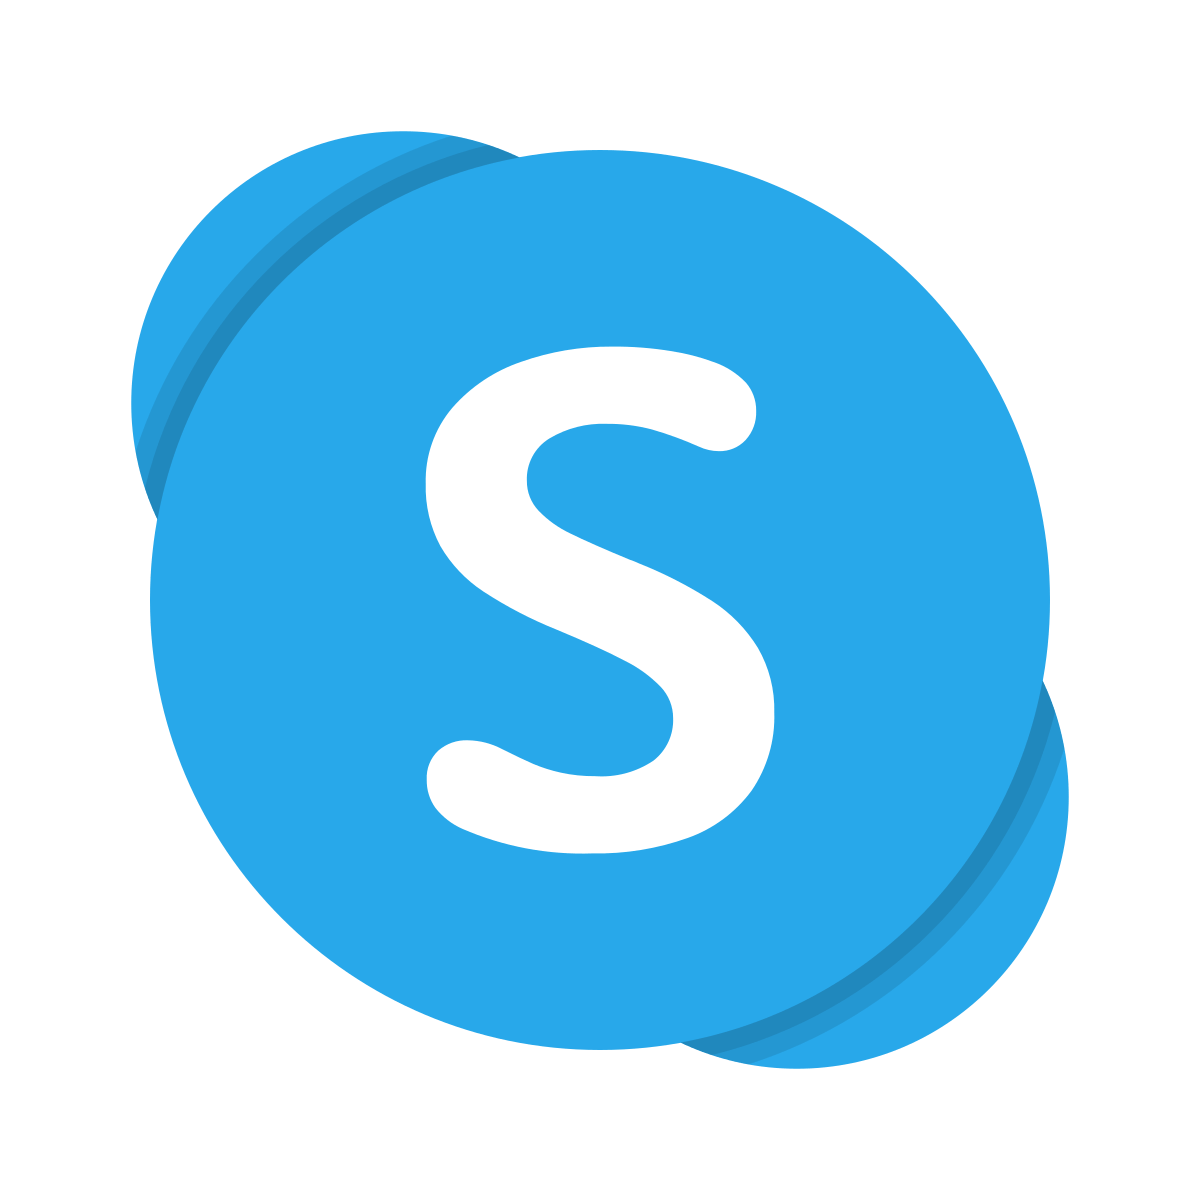 how to share screen on skype web app